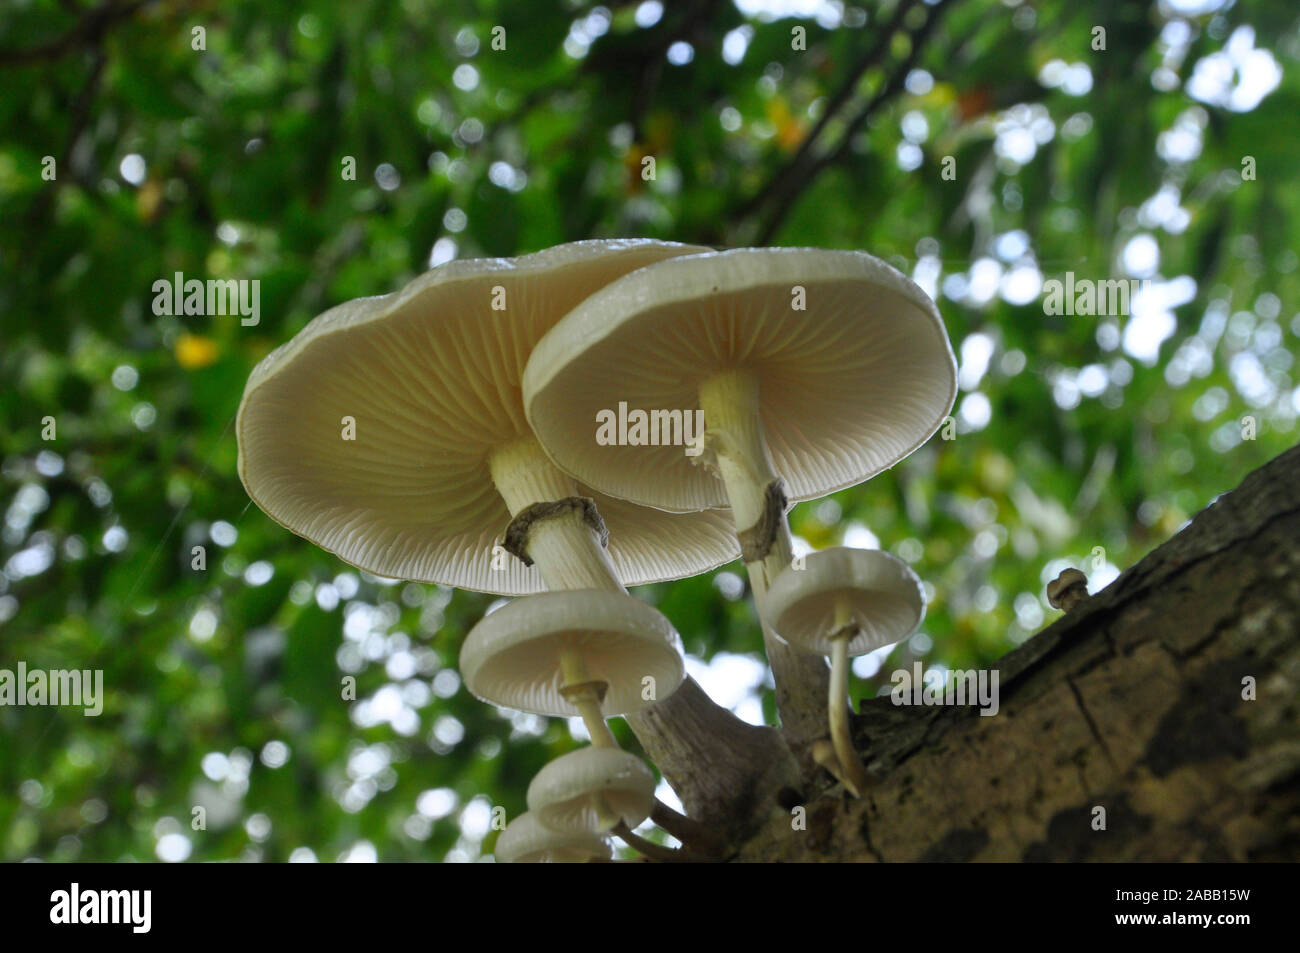 Porcelain fungus ,Oudemansiella mucida, growing on a dead branch, viewed from below, Stourhead, Wiltshire,UK Stock Photo